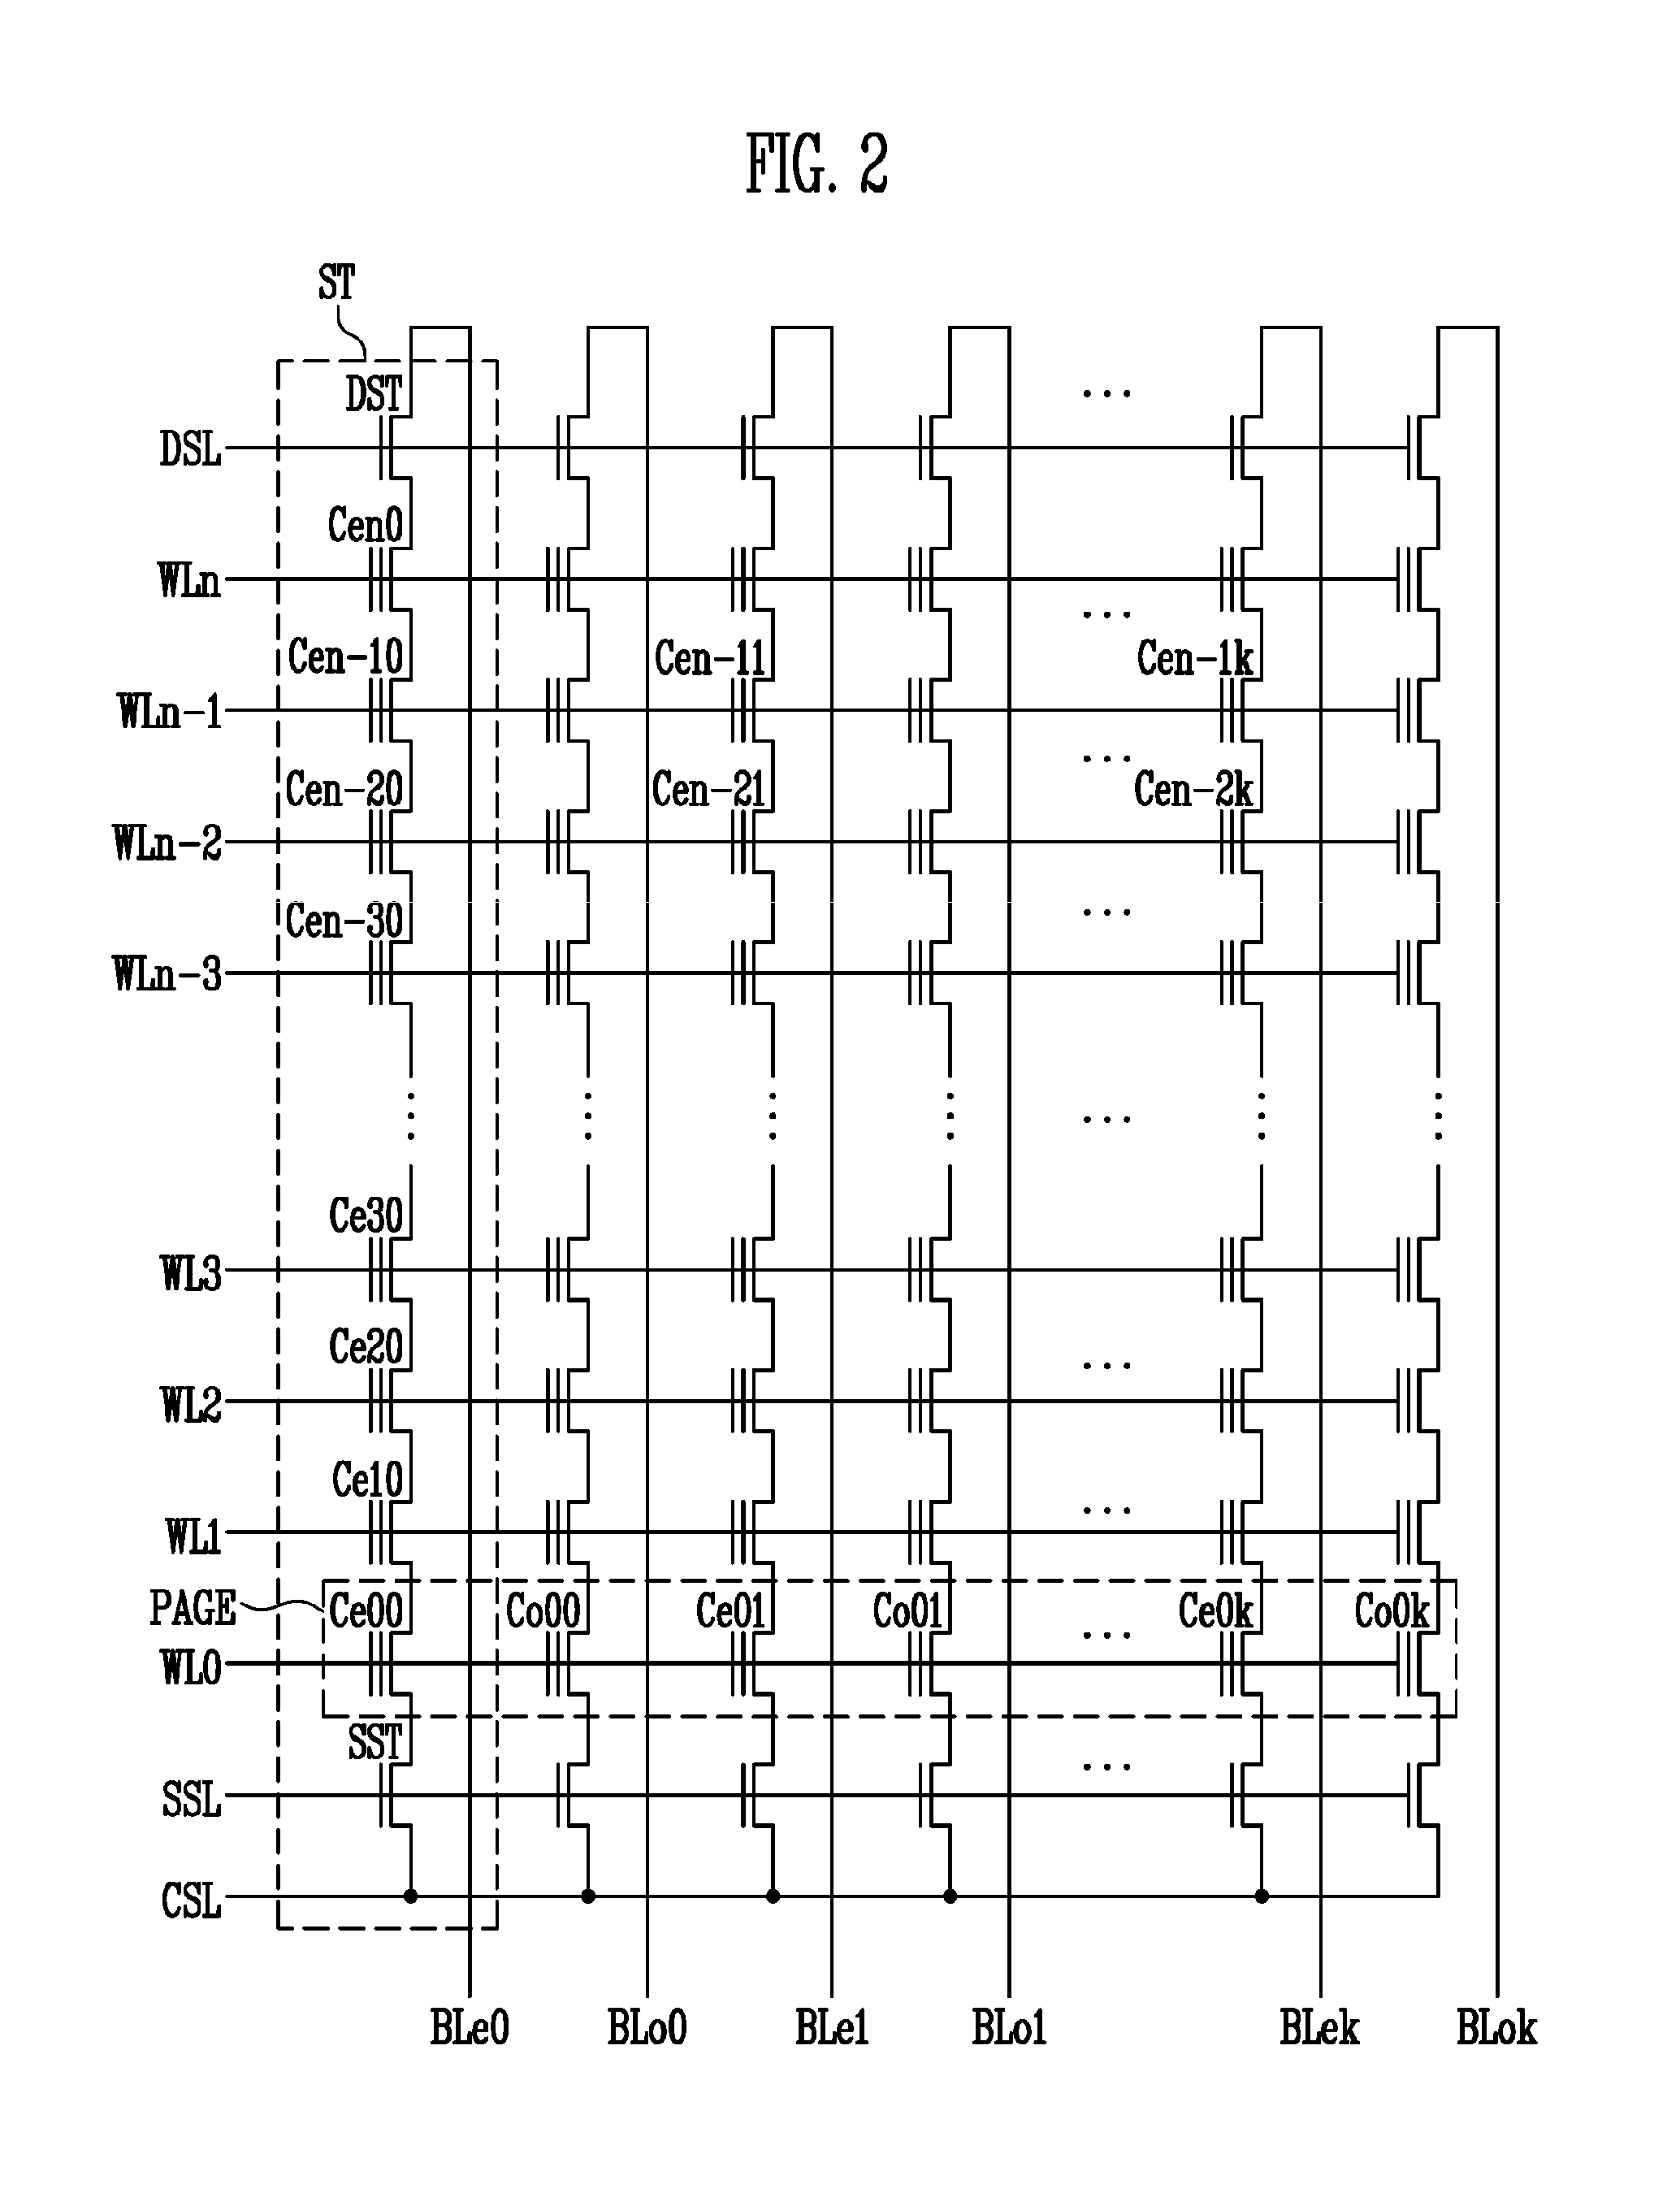 Semiconductor memory device including memory cells and a peripheral circuit and method of operating the same